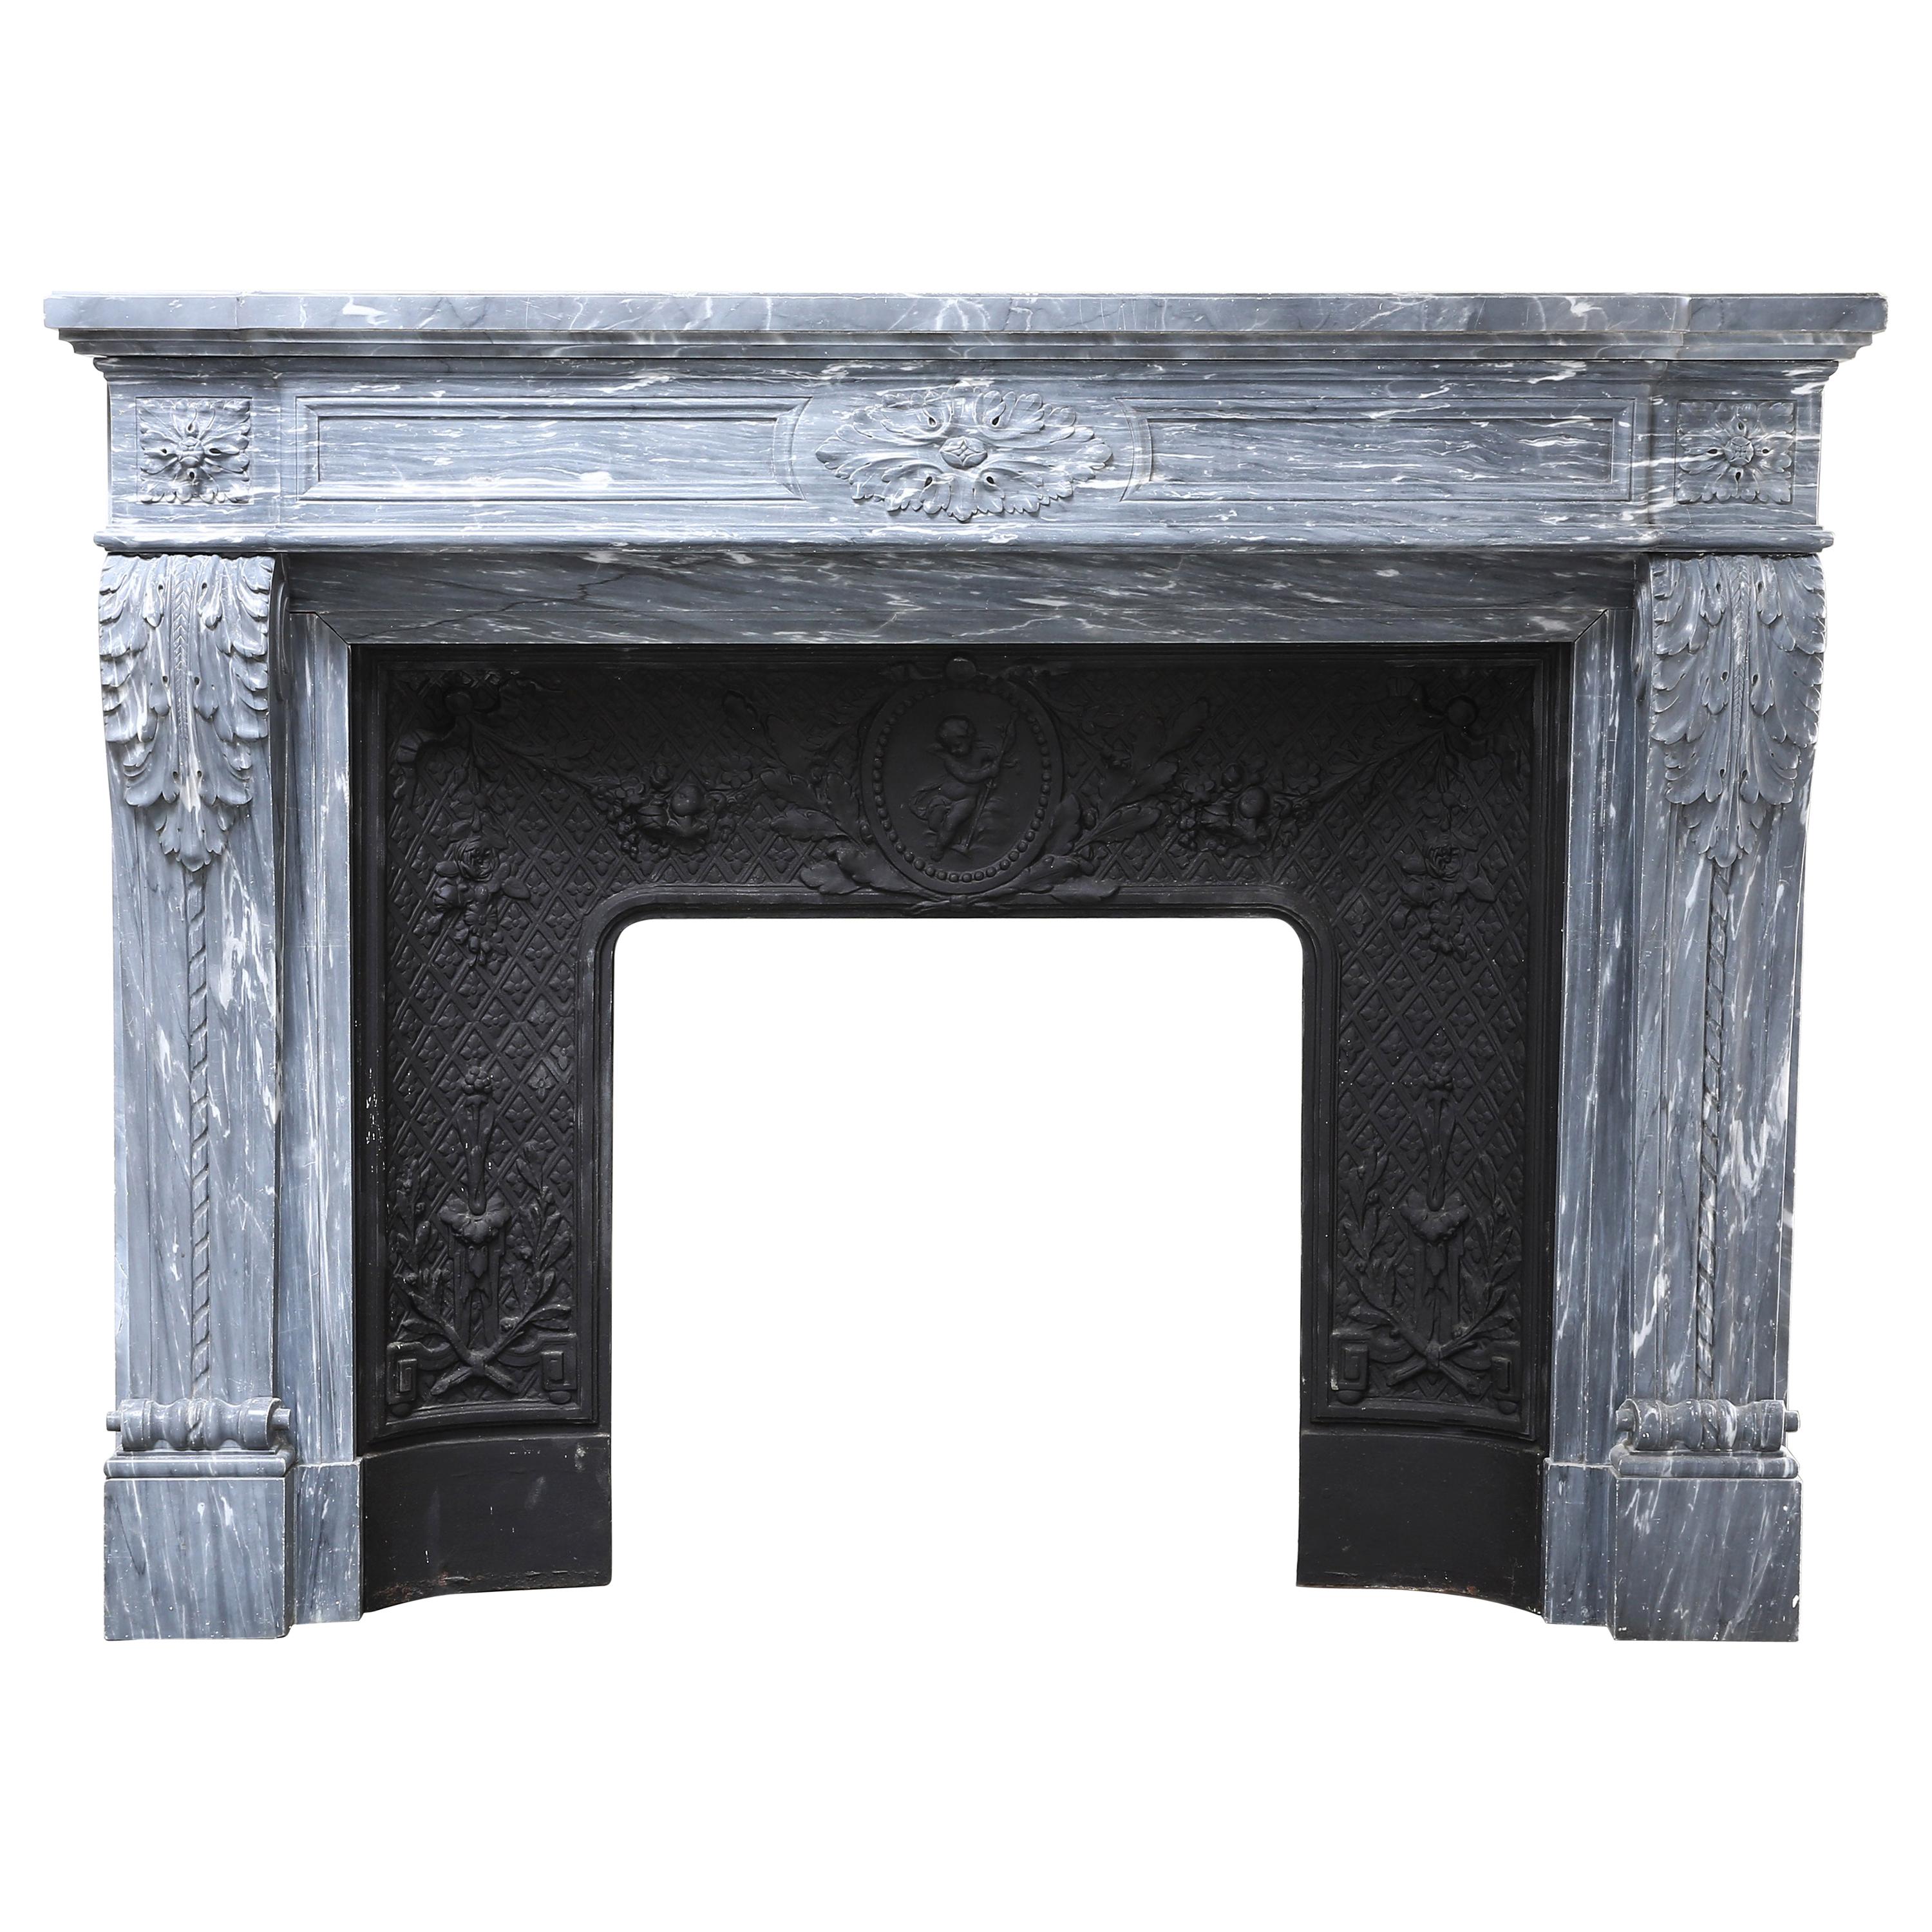 19th Century Mantel Piece in Style of Louis XVI